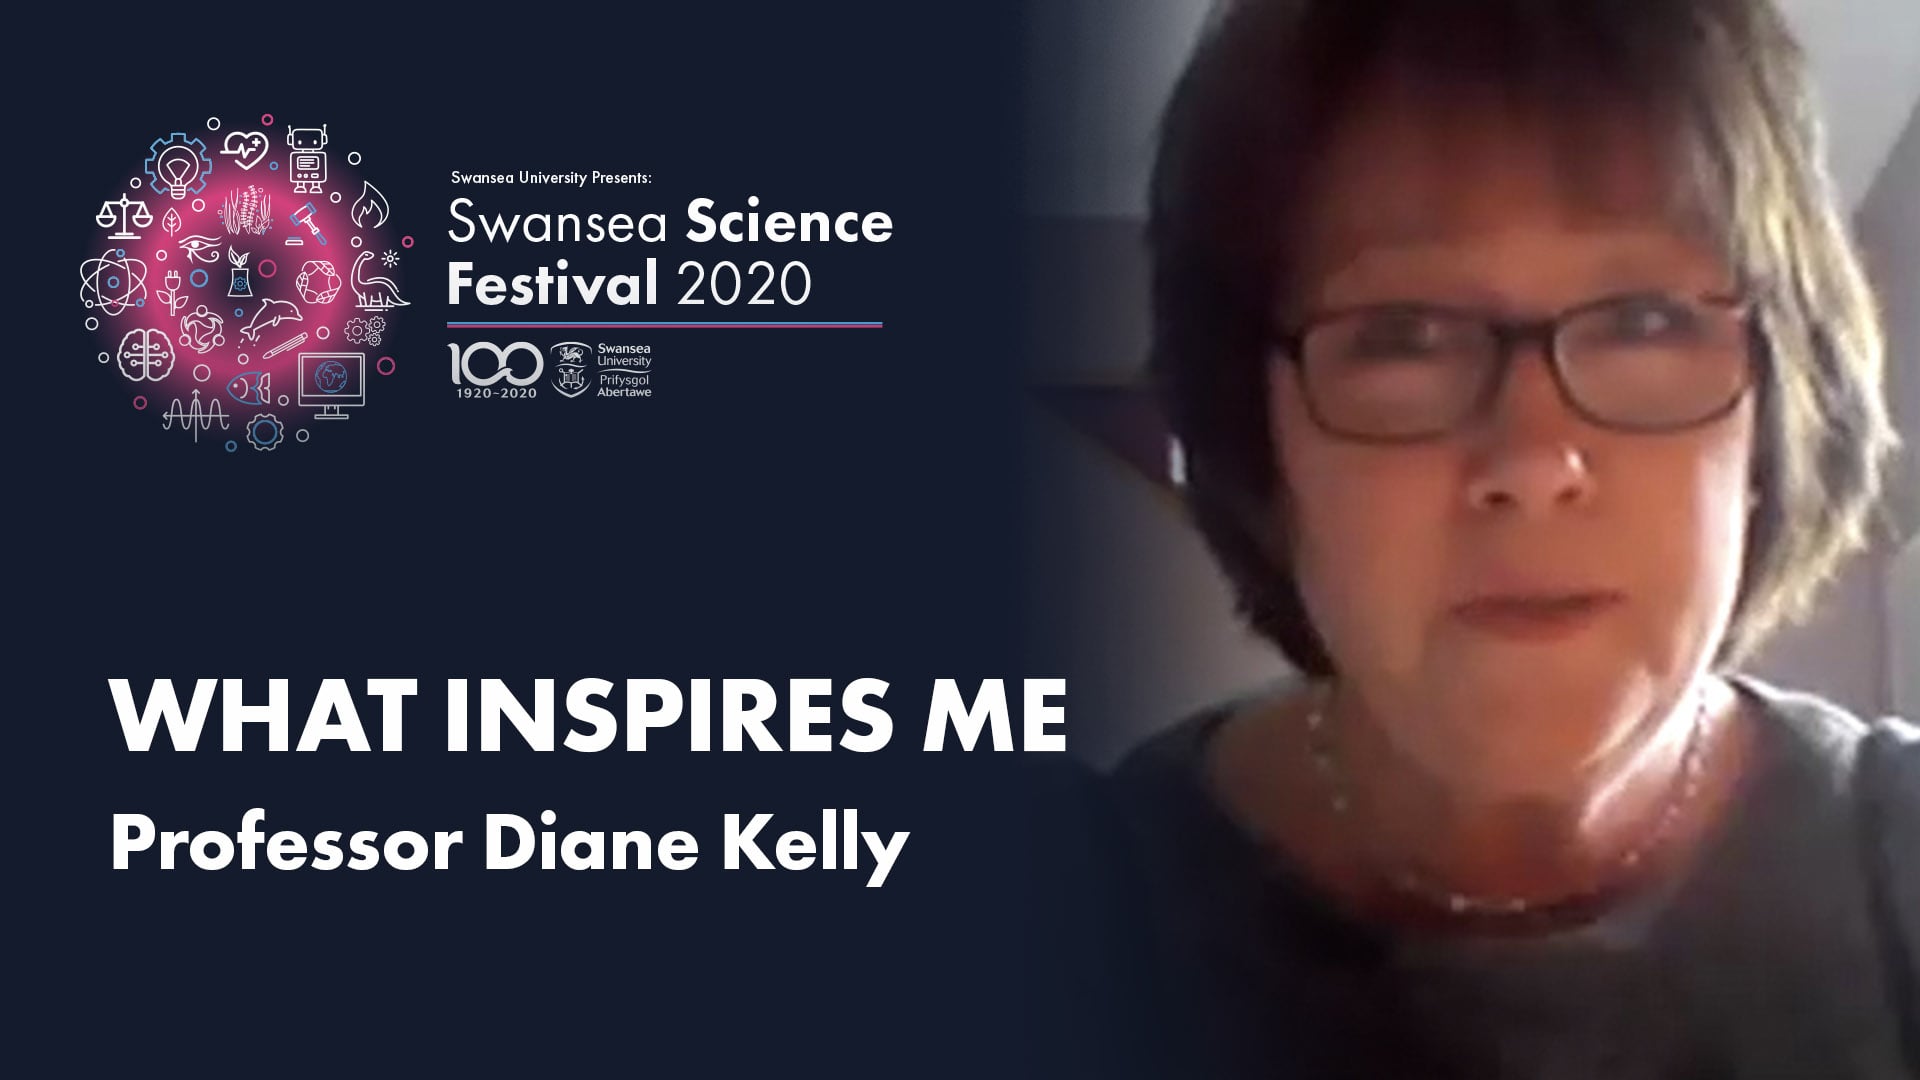 What inspires me an imae of Diane Kelly overlaid onto the Swansea Sci Fest Background